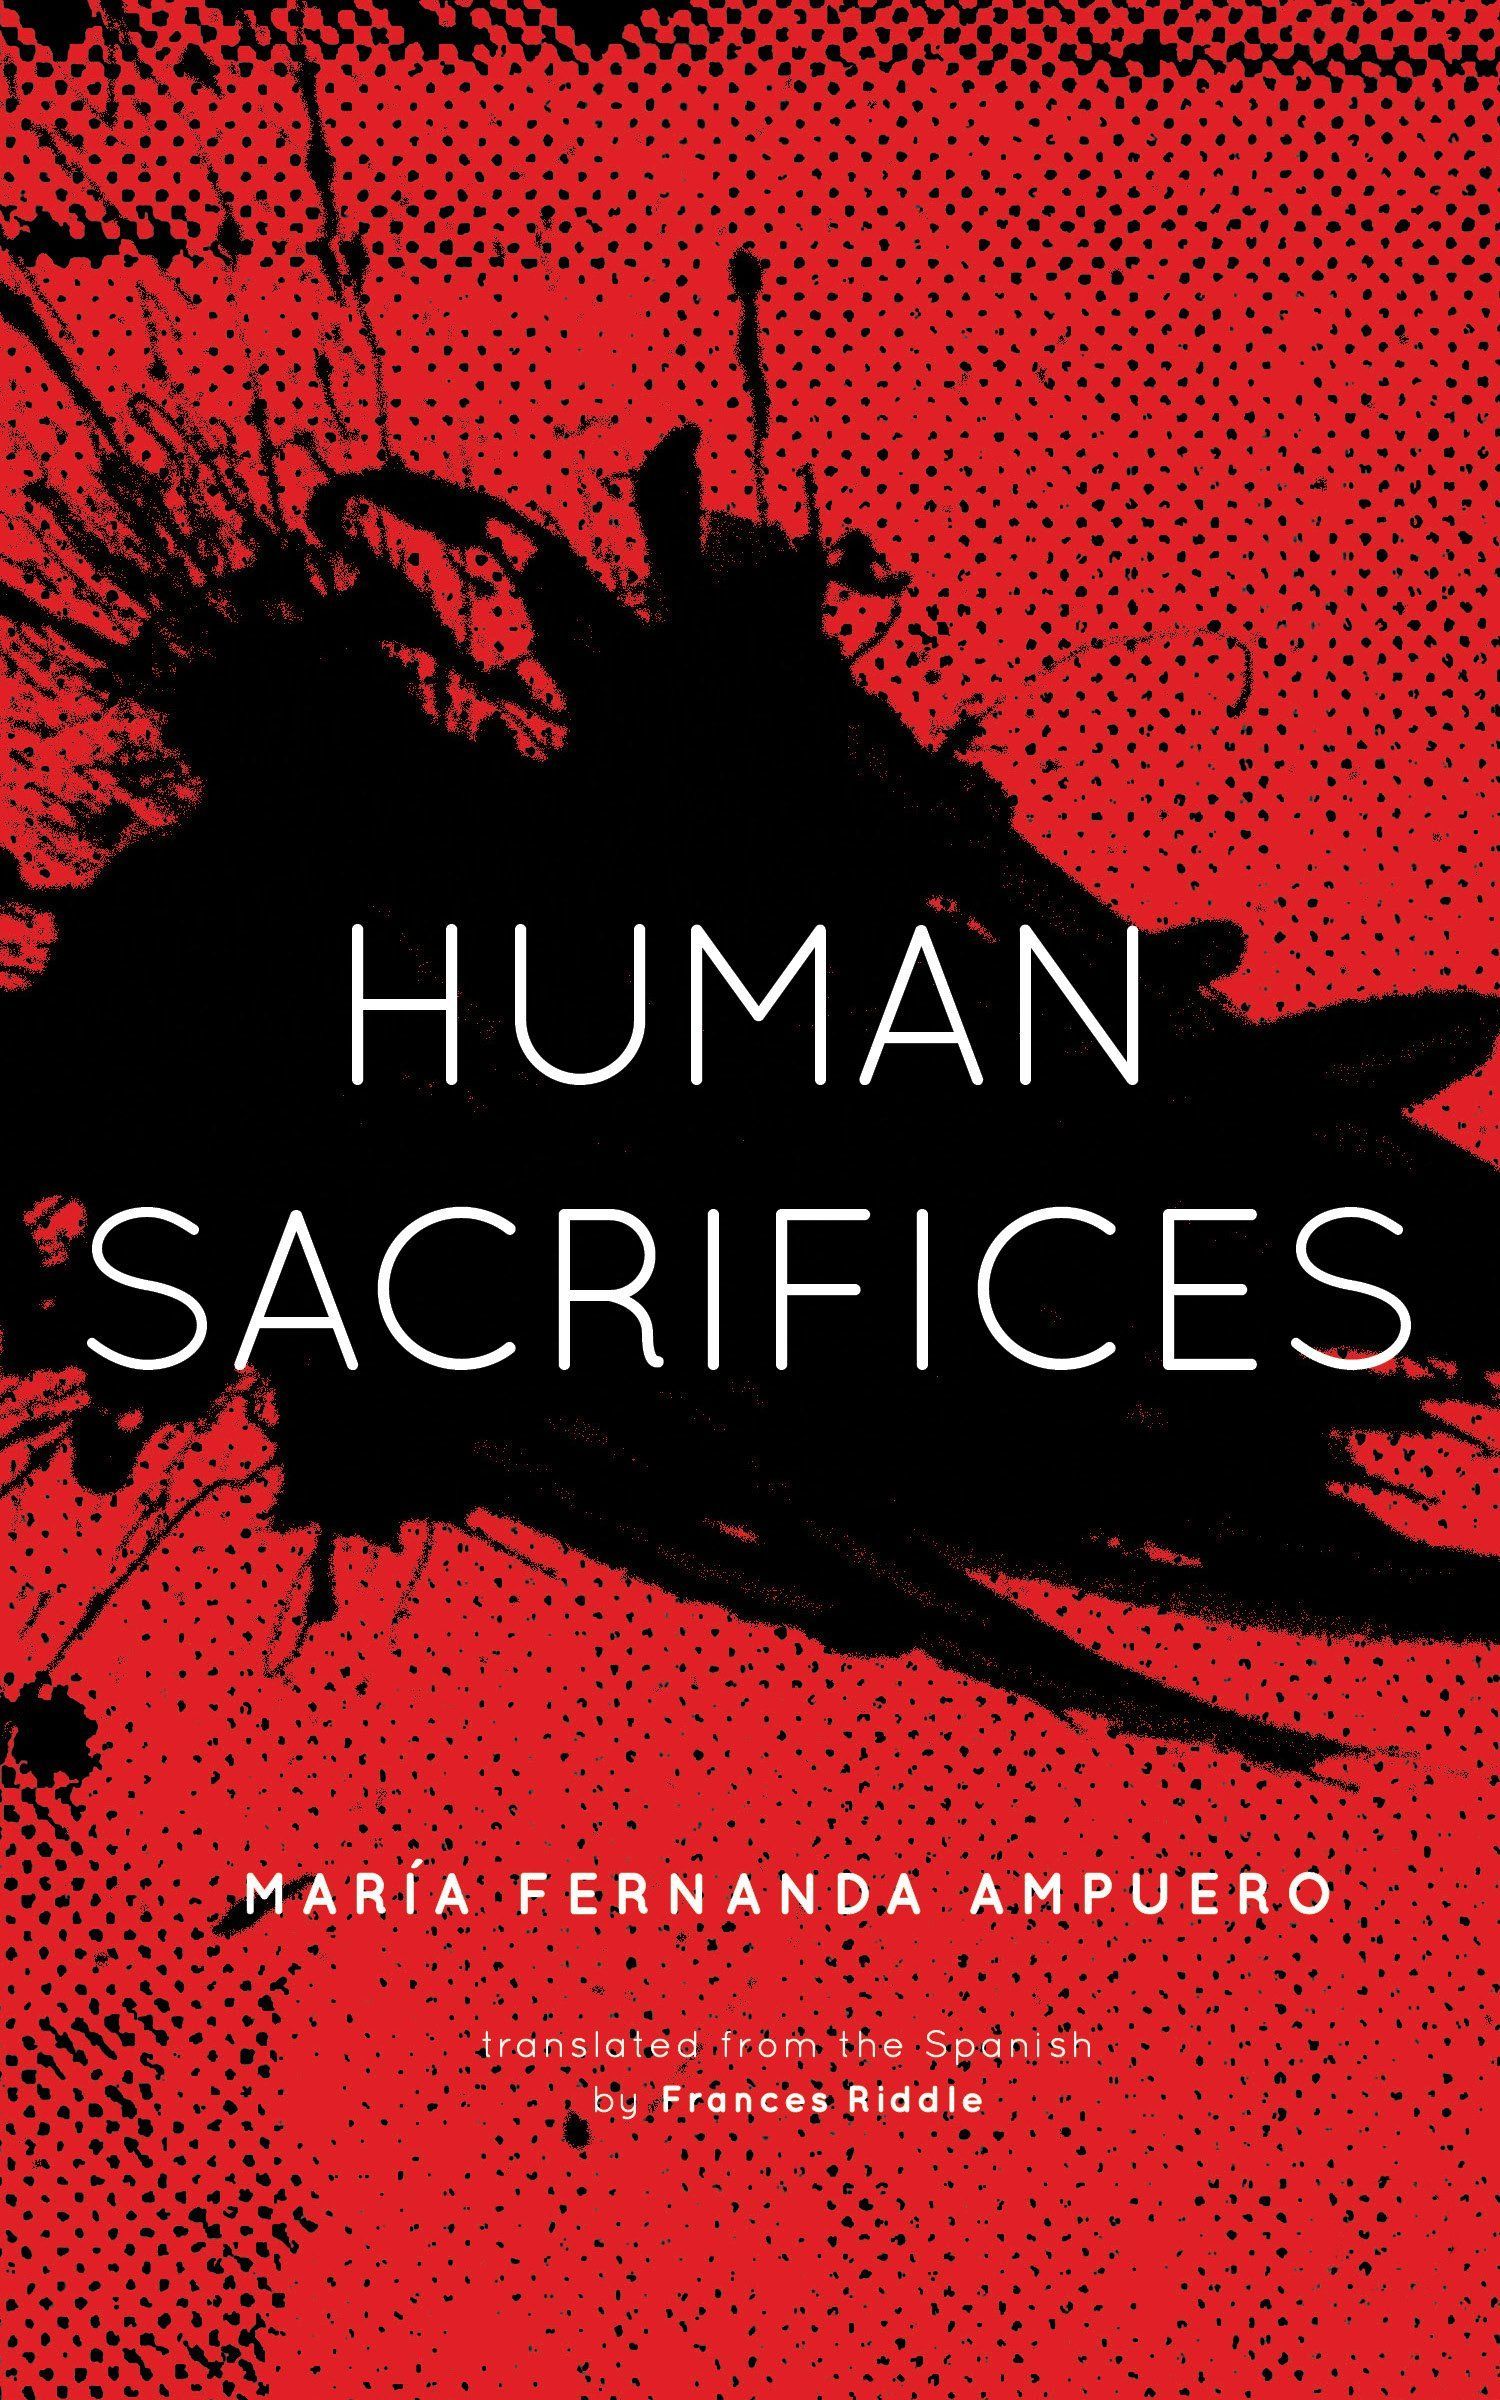 <p><strong>$14.83</strong></p><p>This slim Ecuadorean short story collection, translated by Frances Riddle and published by the Feminist Press, is the kind of book that will make you lose track of time. In one story, an undocumented woman is anxious that any job posting that will accept her without papers is a scam or an exploitative situation. Nonetheless, she has to do something to get money to send home, and she’s not surprised that her fears are proved to be true. “See me, see me. Tiny thing in a big world, a human sacrifice, nothing. Here, no one would hear me scream.” In another story, a little girl confronts the realities of class division and her own mortality for the first time. But these stories aren’t a universally bleak reading experience — they’re about the fight to maintain human connection and affirm dignity despite horrifying circumstances.</p>